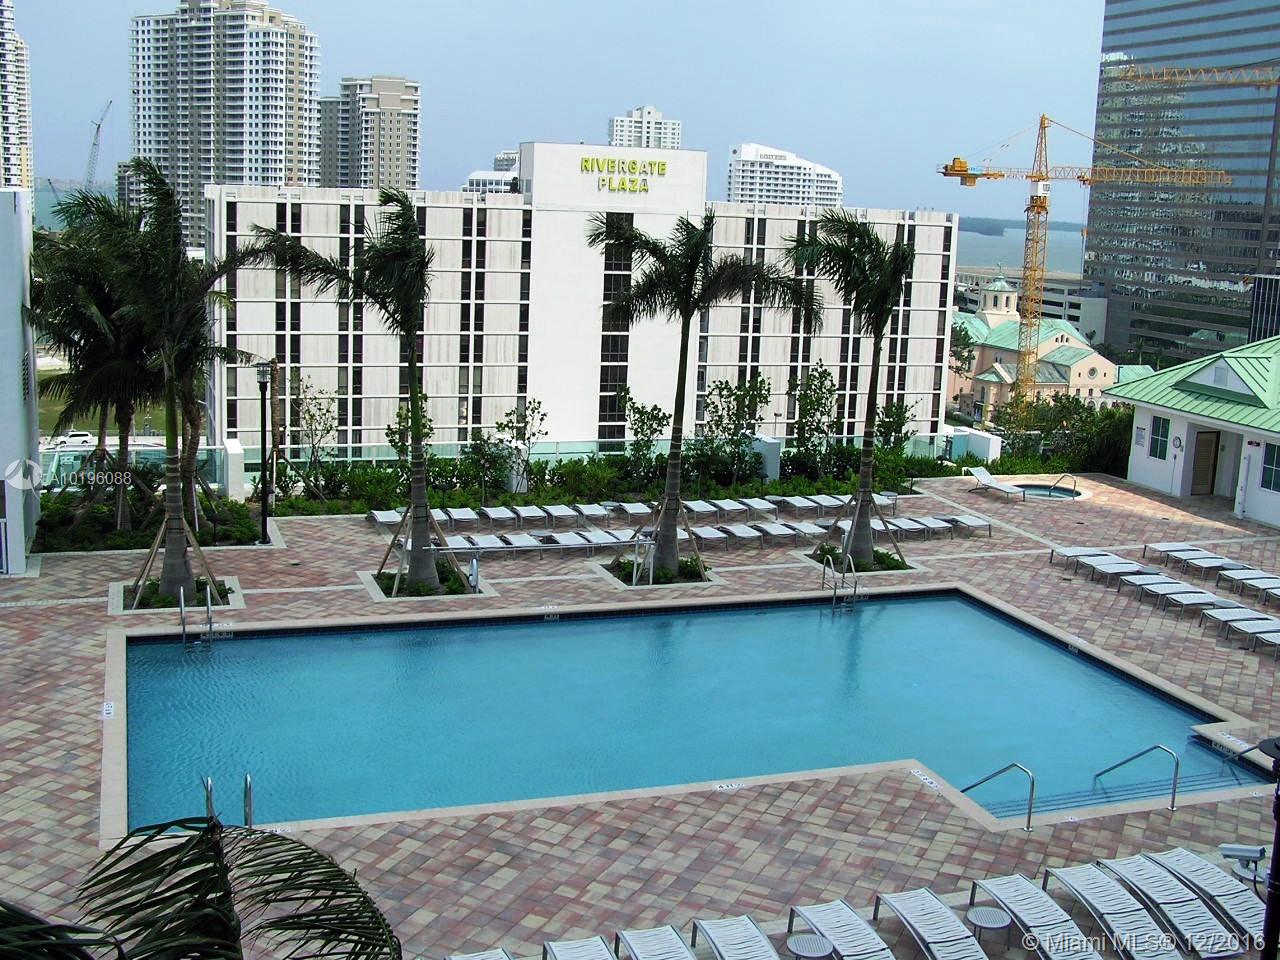 Brickell on the River North image #31